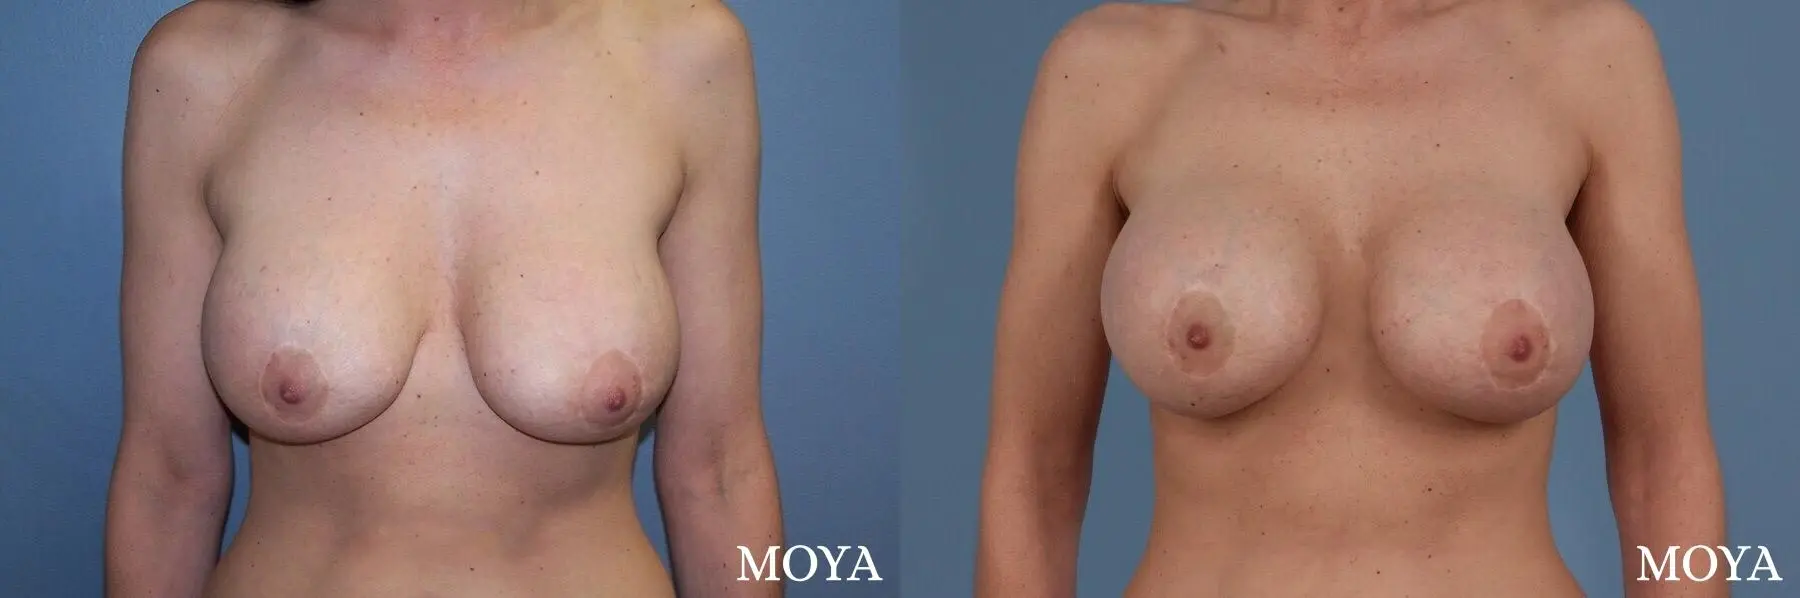 Breast Implant Exchange: Patient 2 - Before and After  